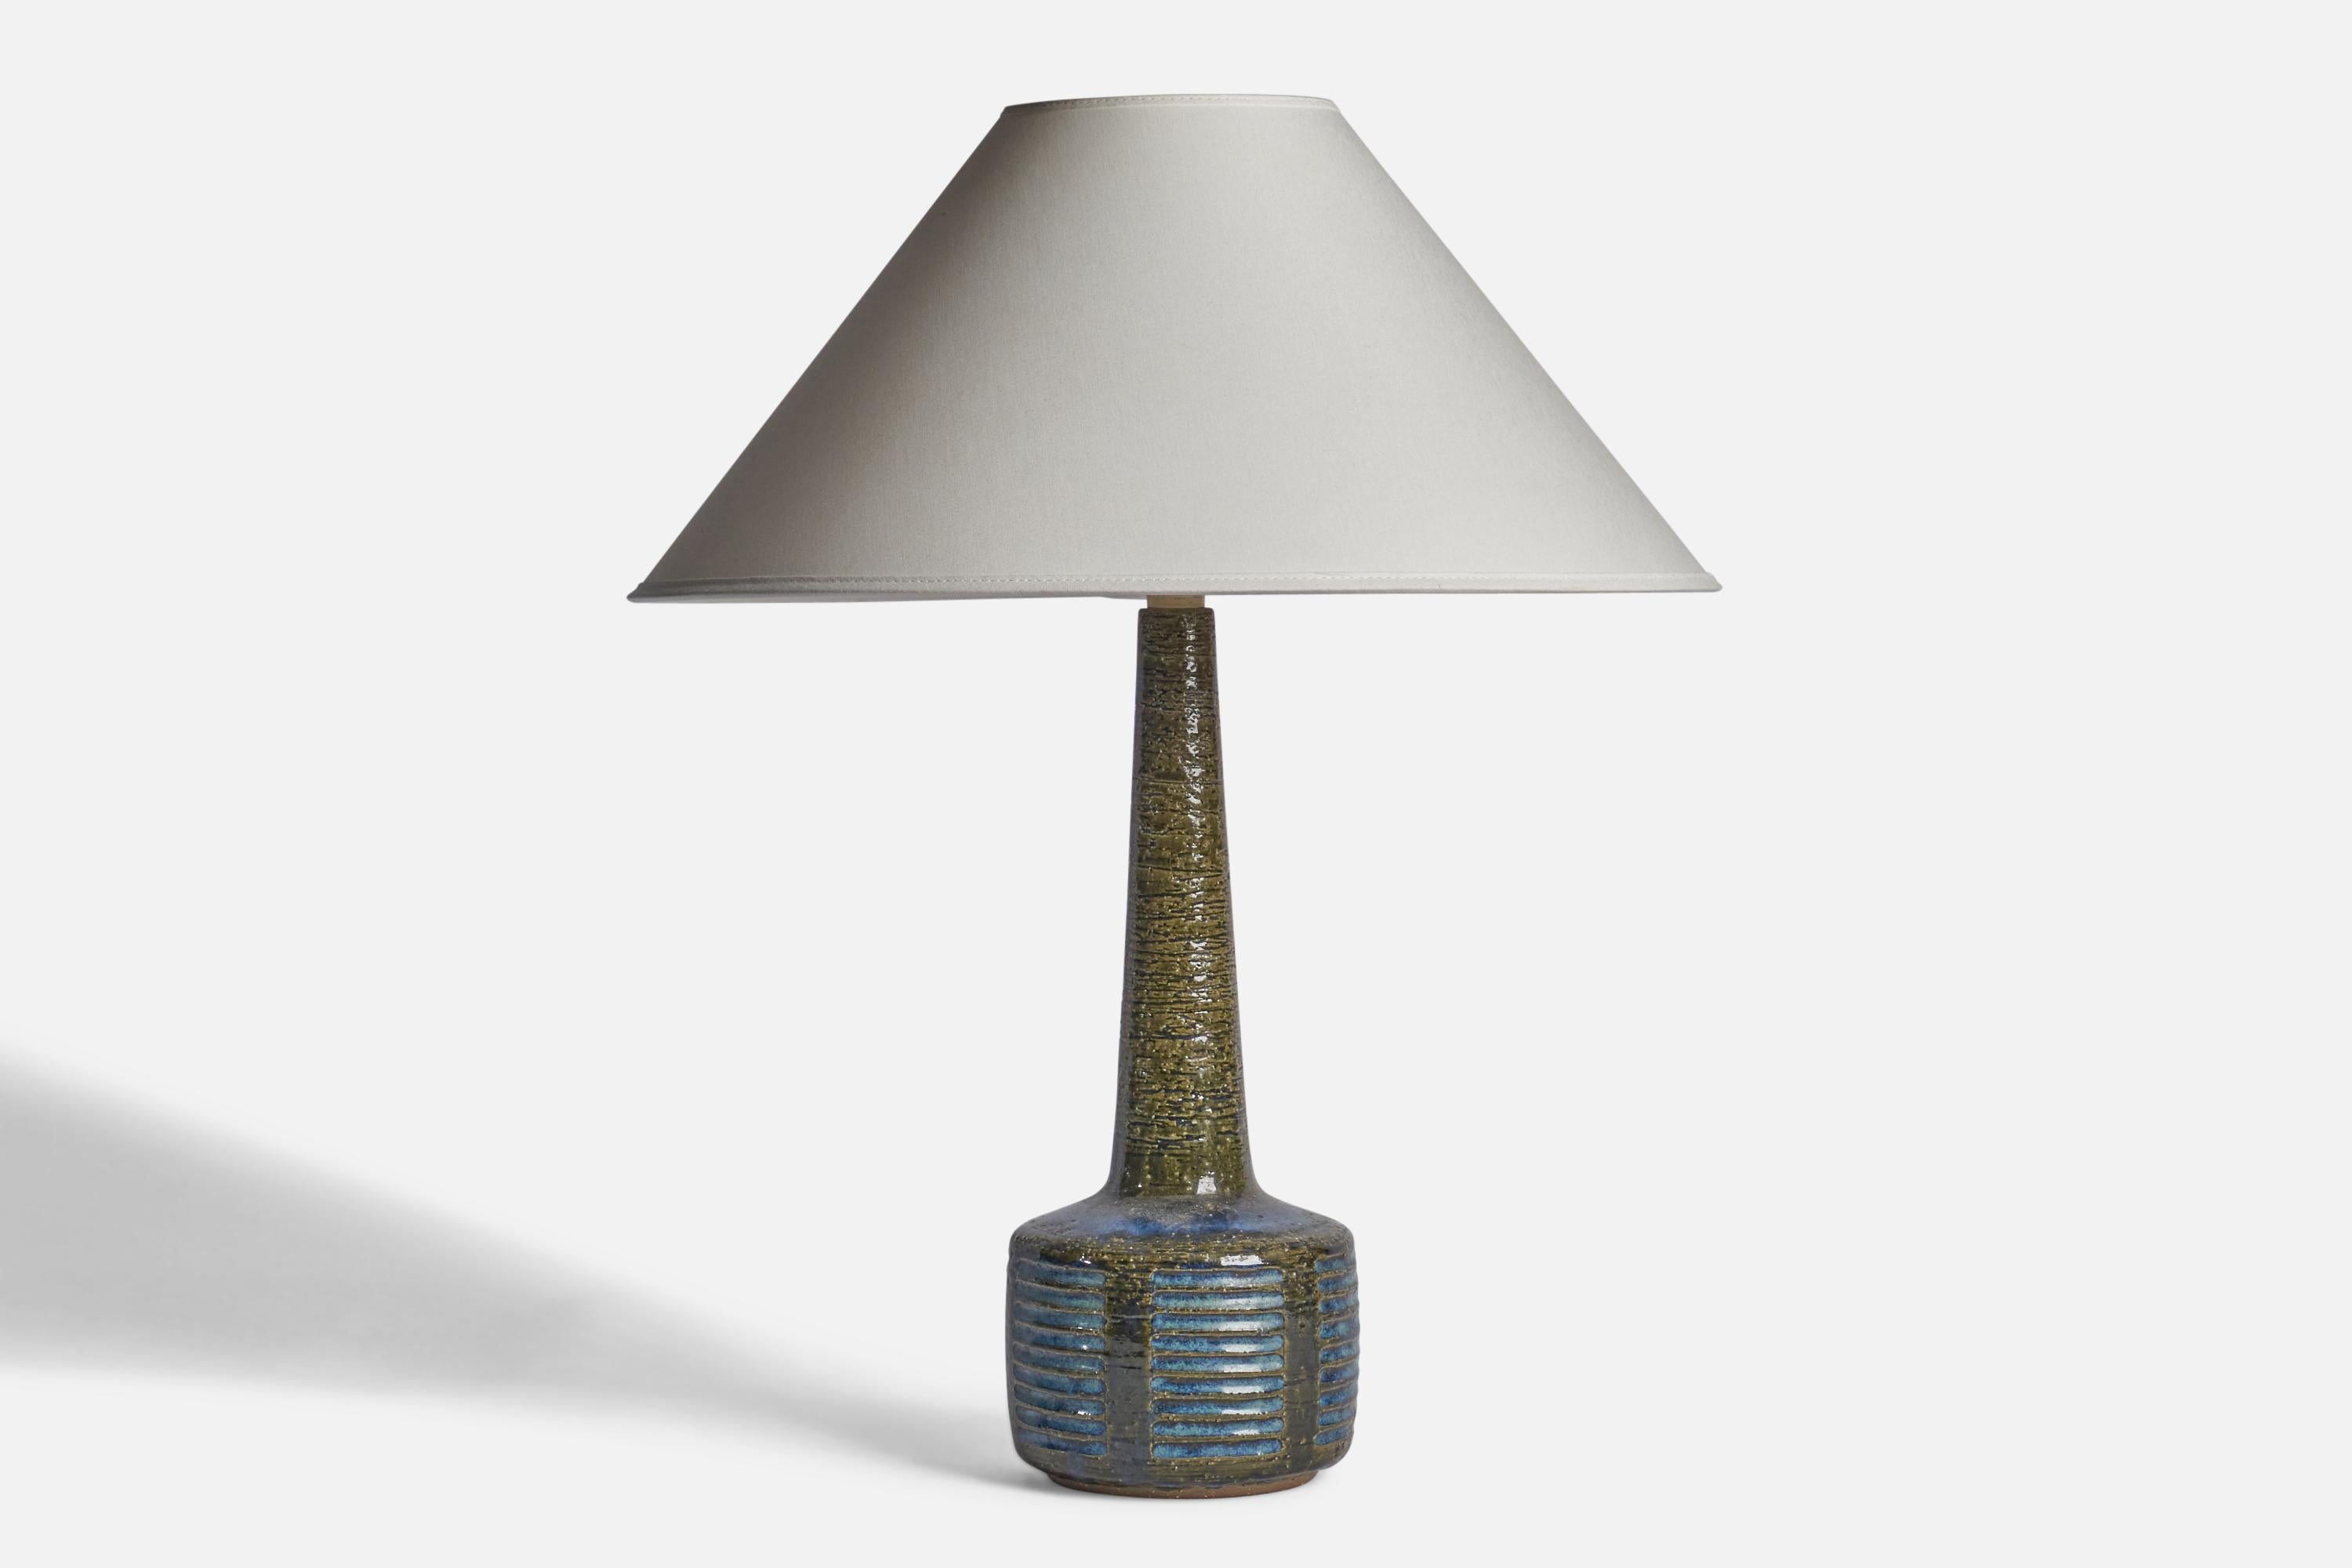 A blue and green-glazed stoneware table lamp designed by Per & Annelise Linneman-Schmidt and produced by Palshus, Denmark, 1960s

Dimensions of Lamp (inches): 15.25” H x 5” Diameter
Dimensions of Shade (inches): 4.5” Top Diameter x 16” Bottom